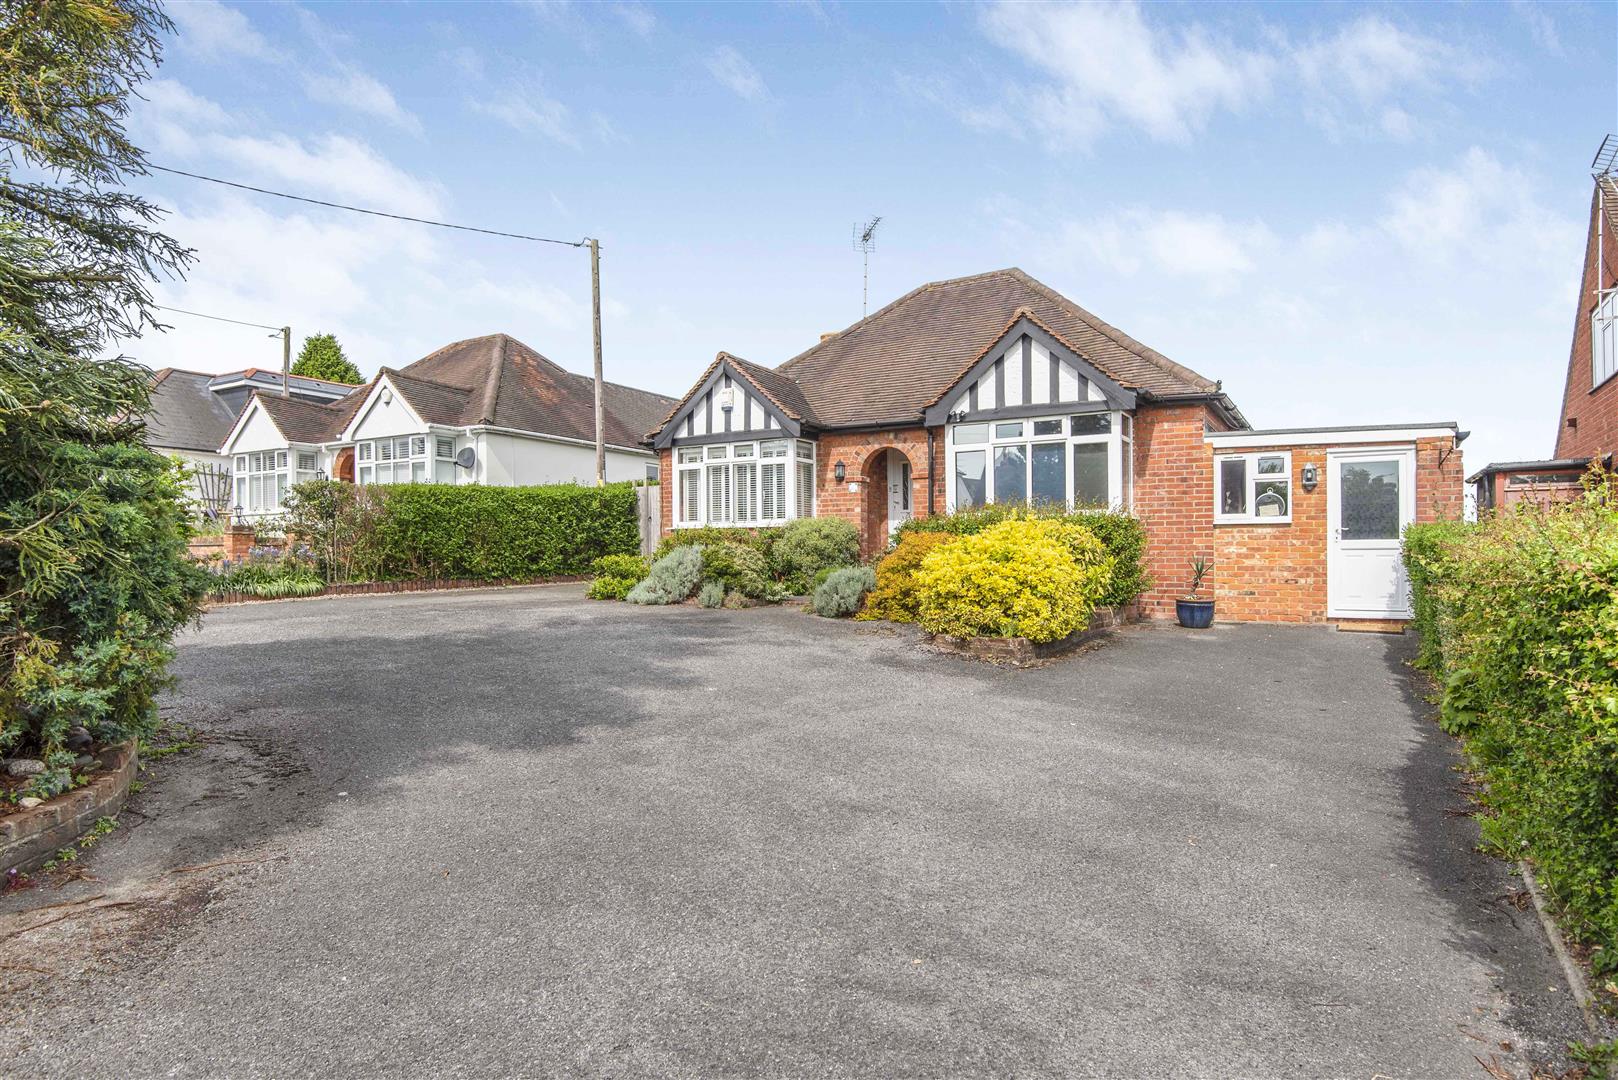 Newfield Road Sonning Common Bungalow for sale in Reading